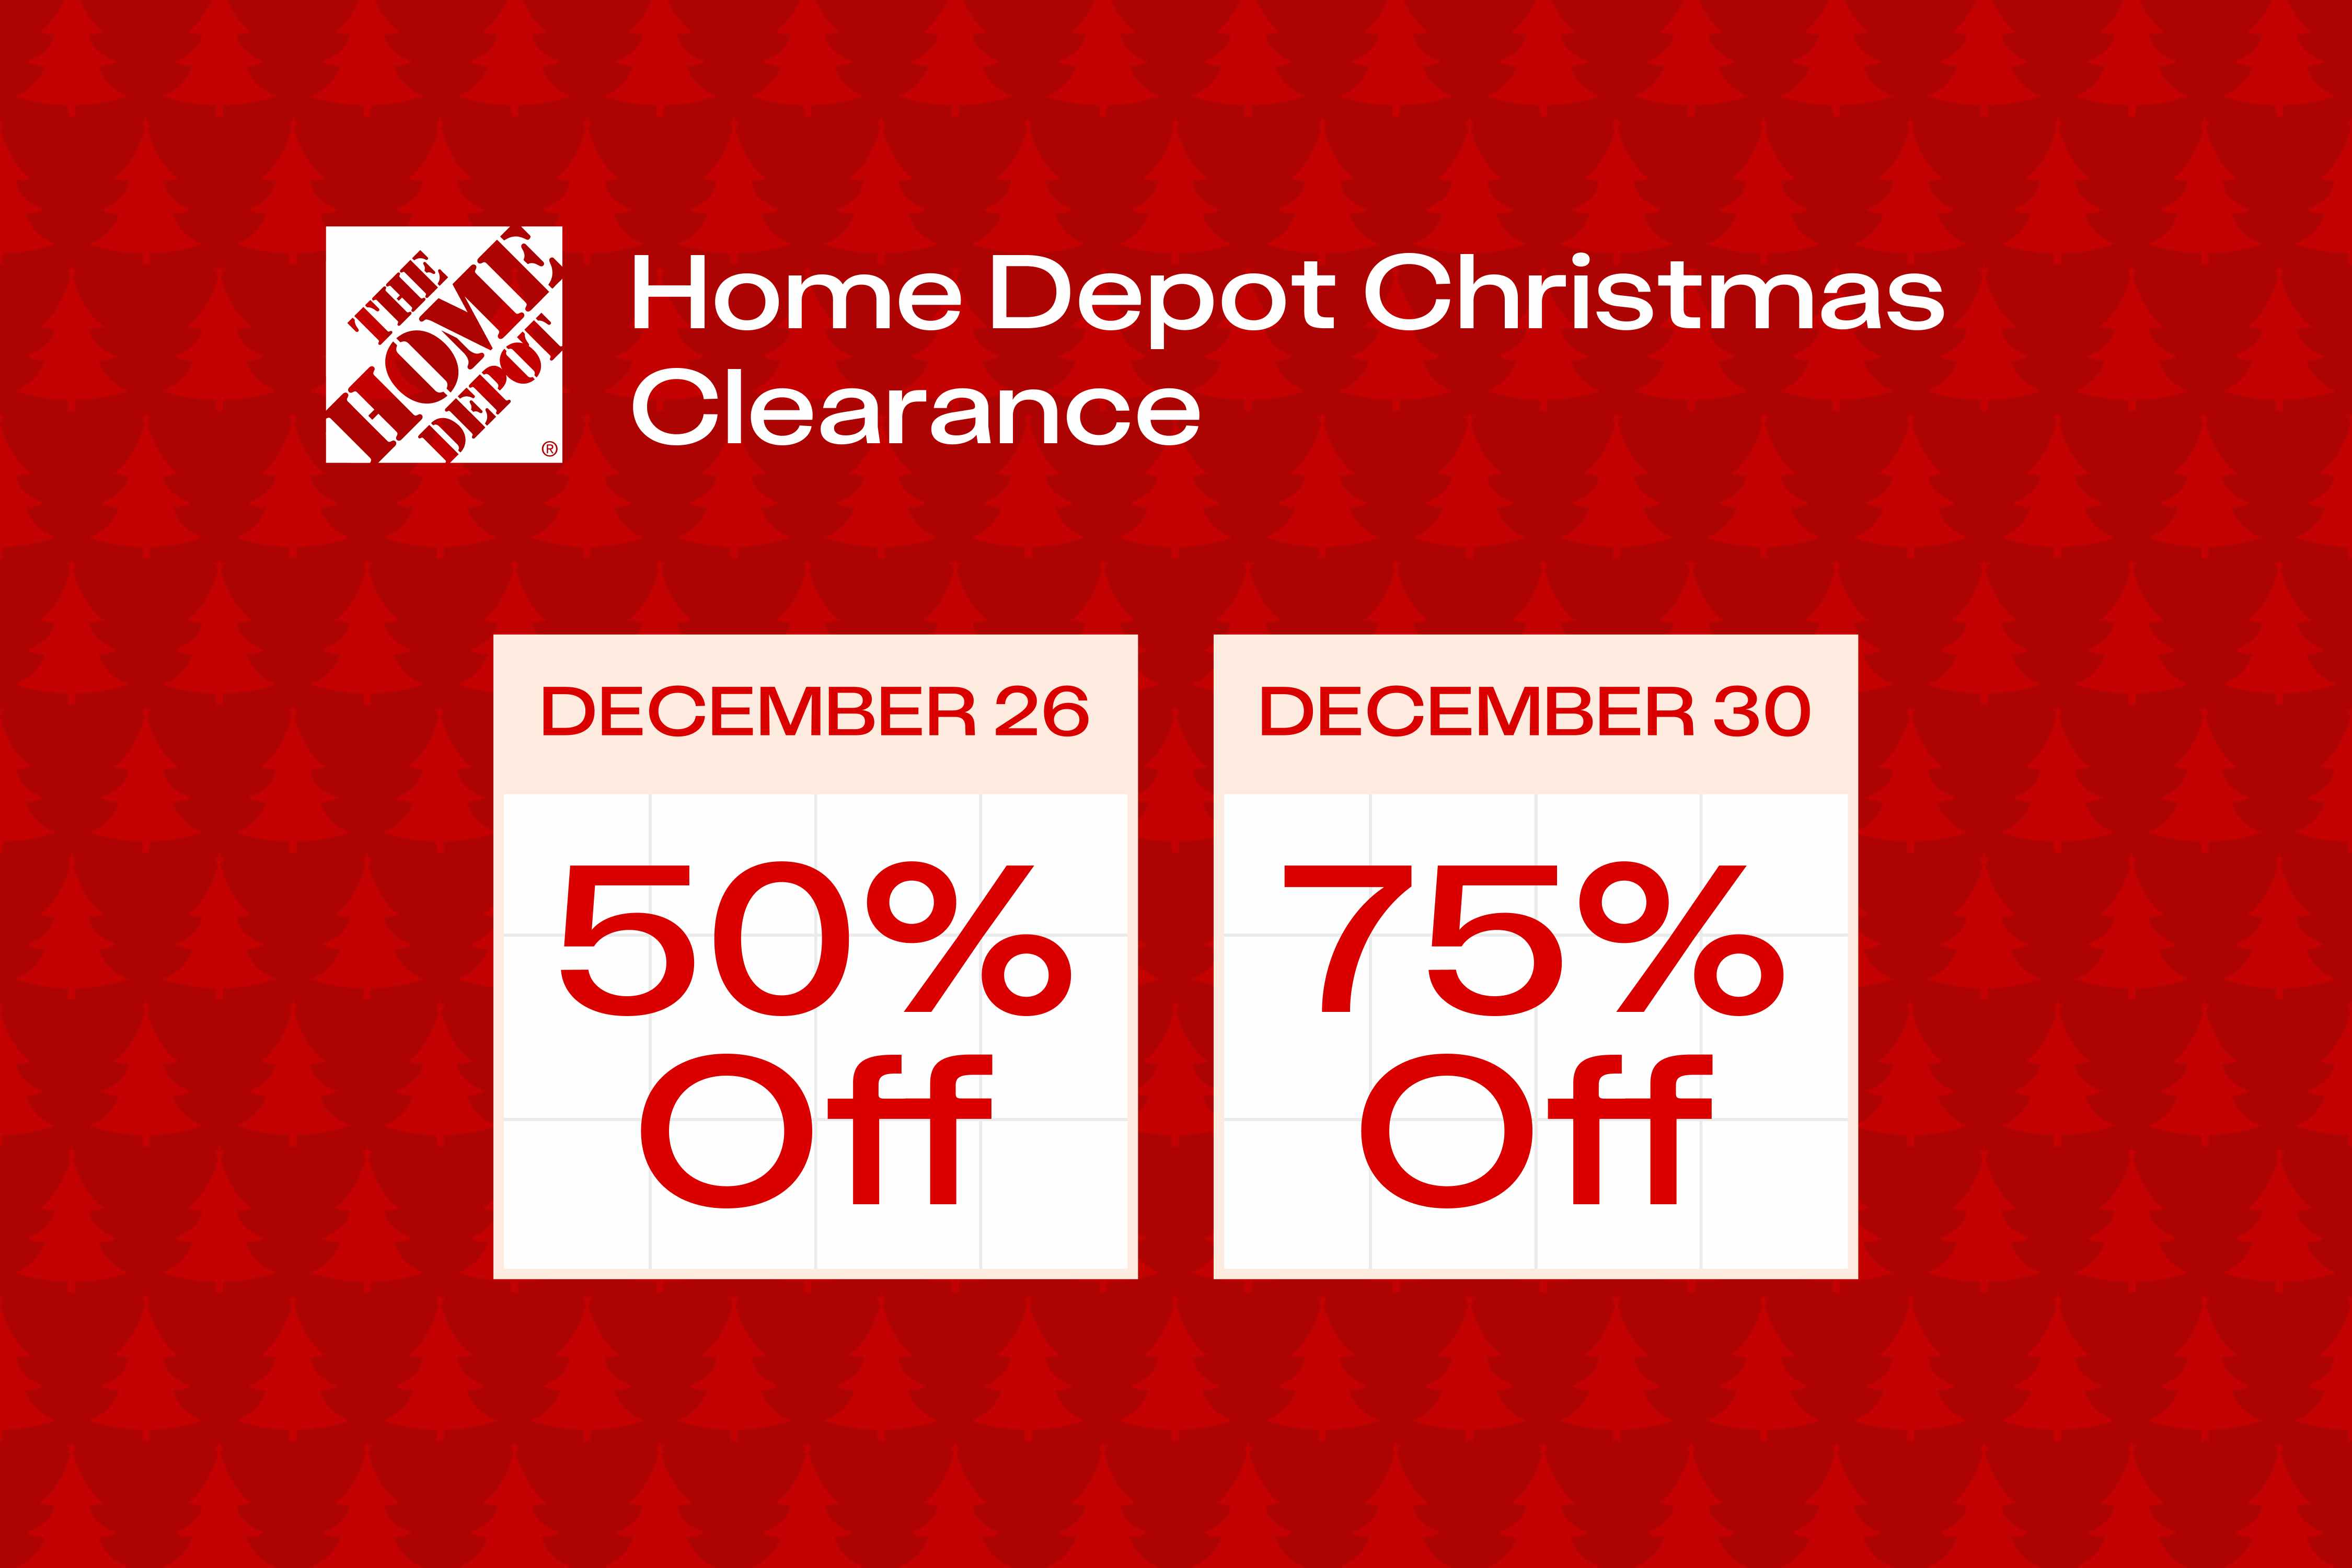 Home Depot Christmas Clearance